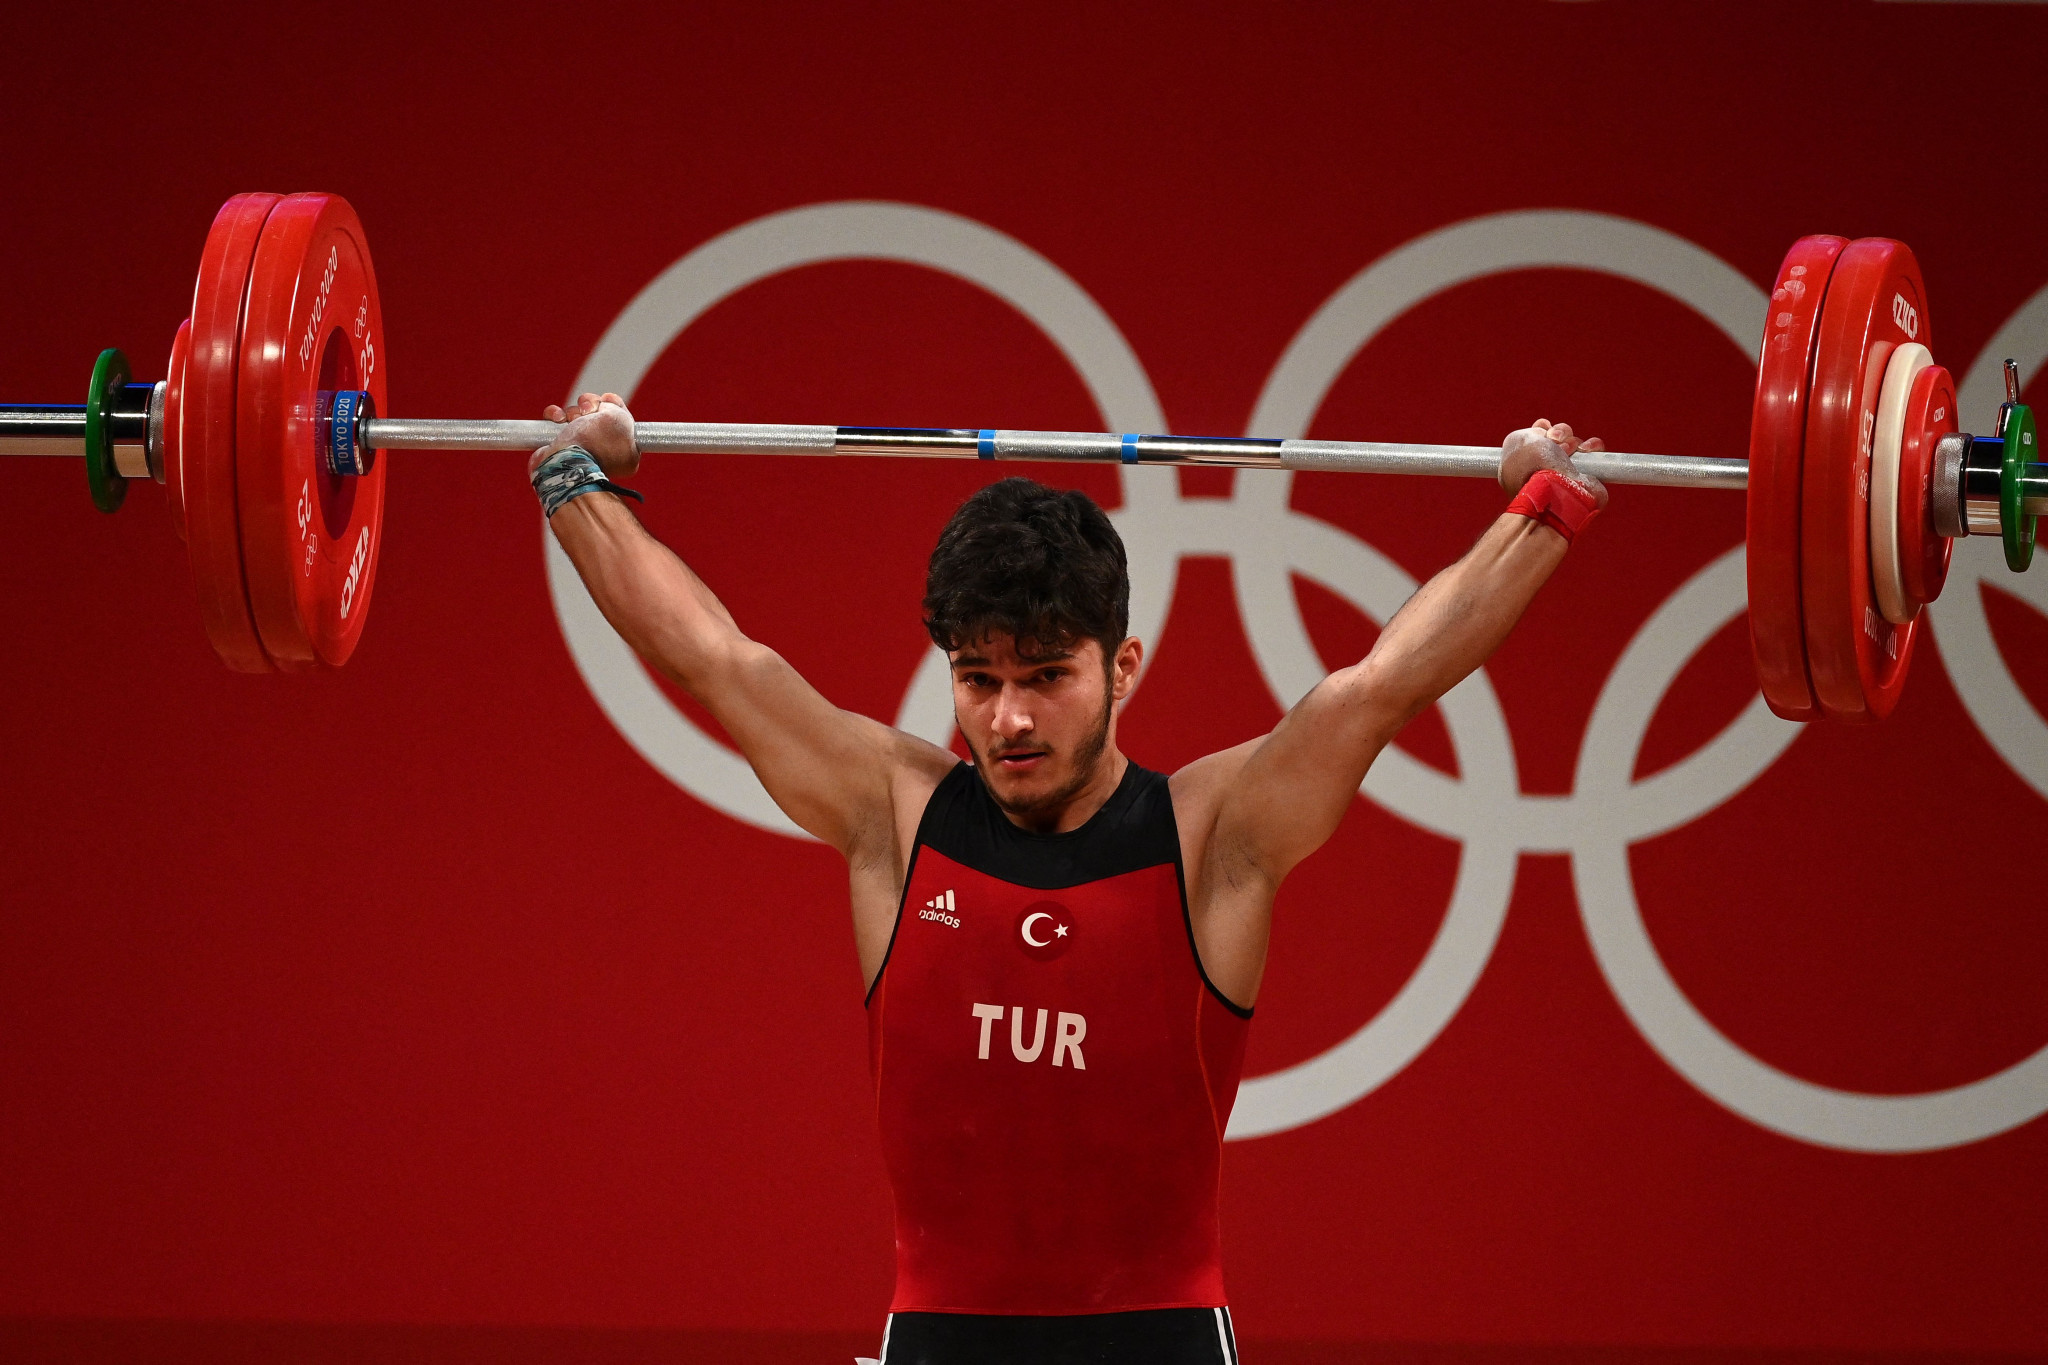 Muhammed Ozbek won the 73kg title, giving Turkey its second gold medal of the week ©Getty Images